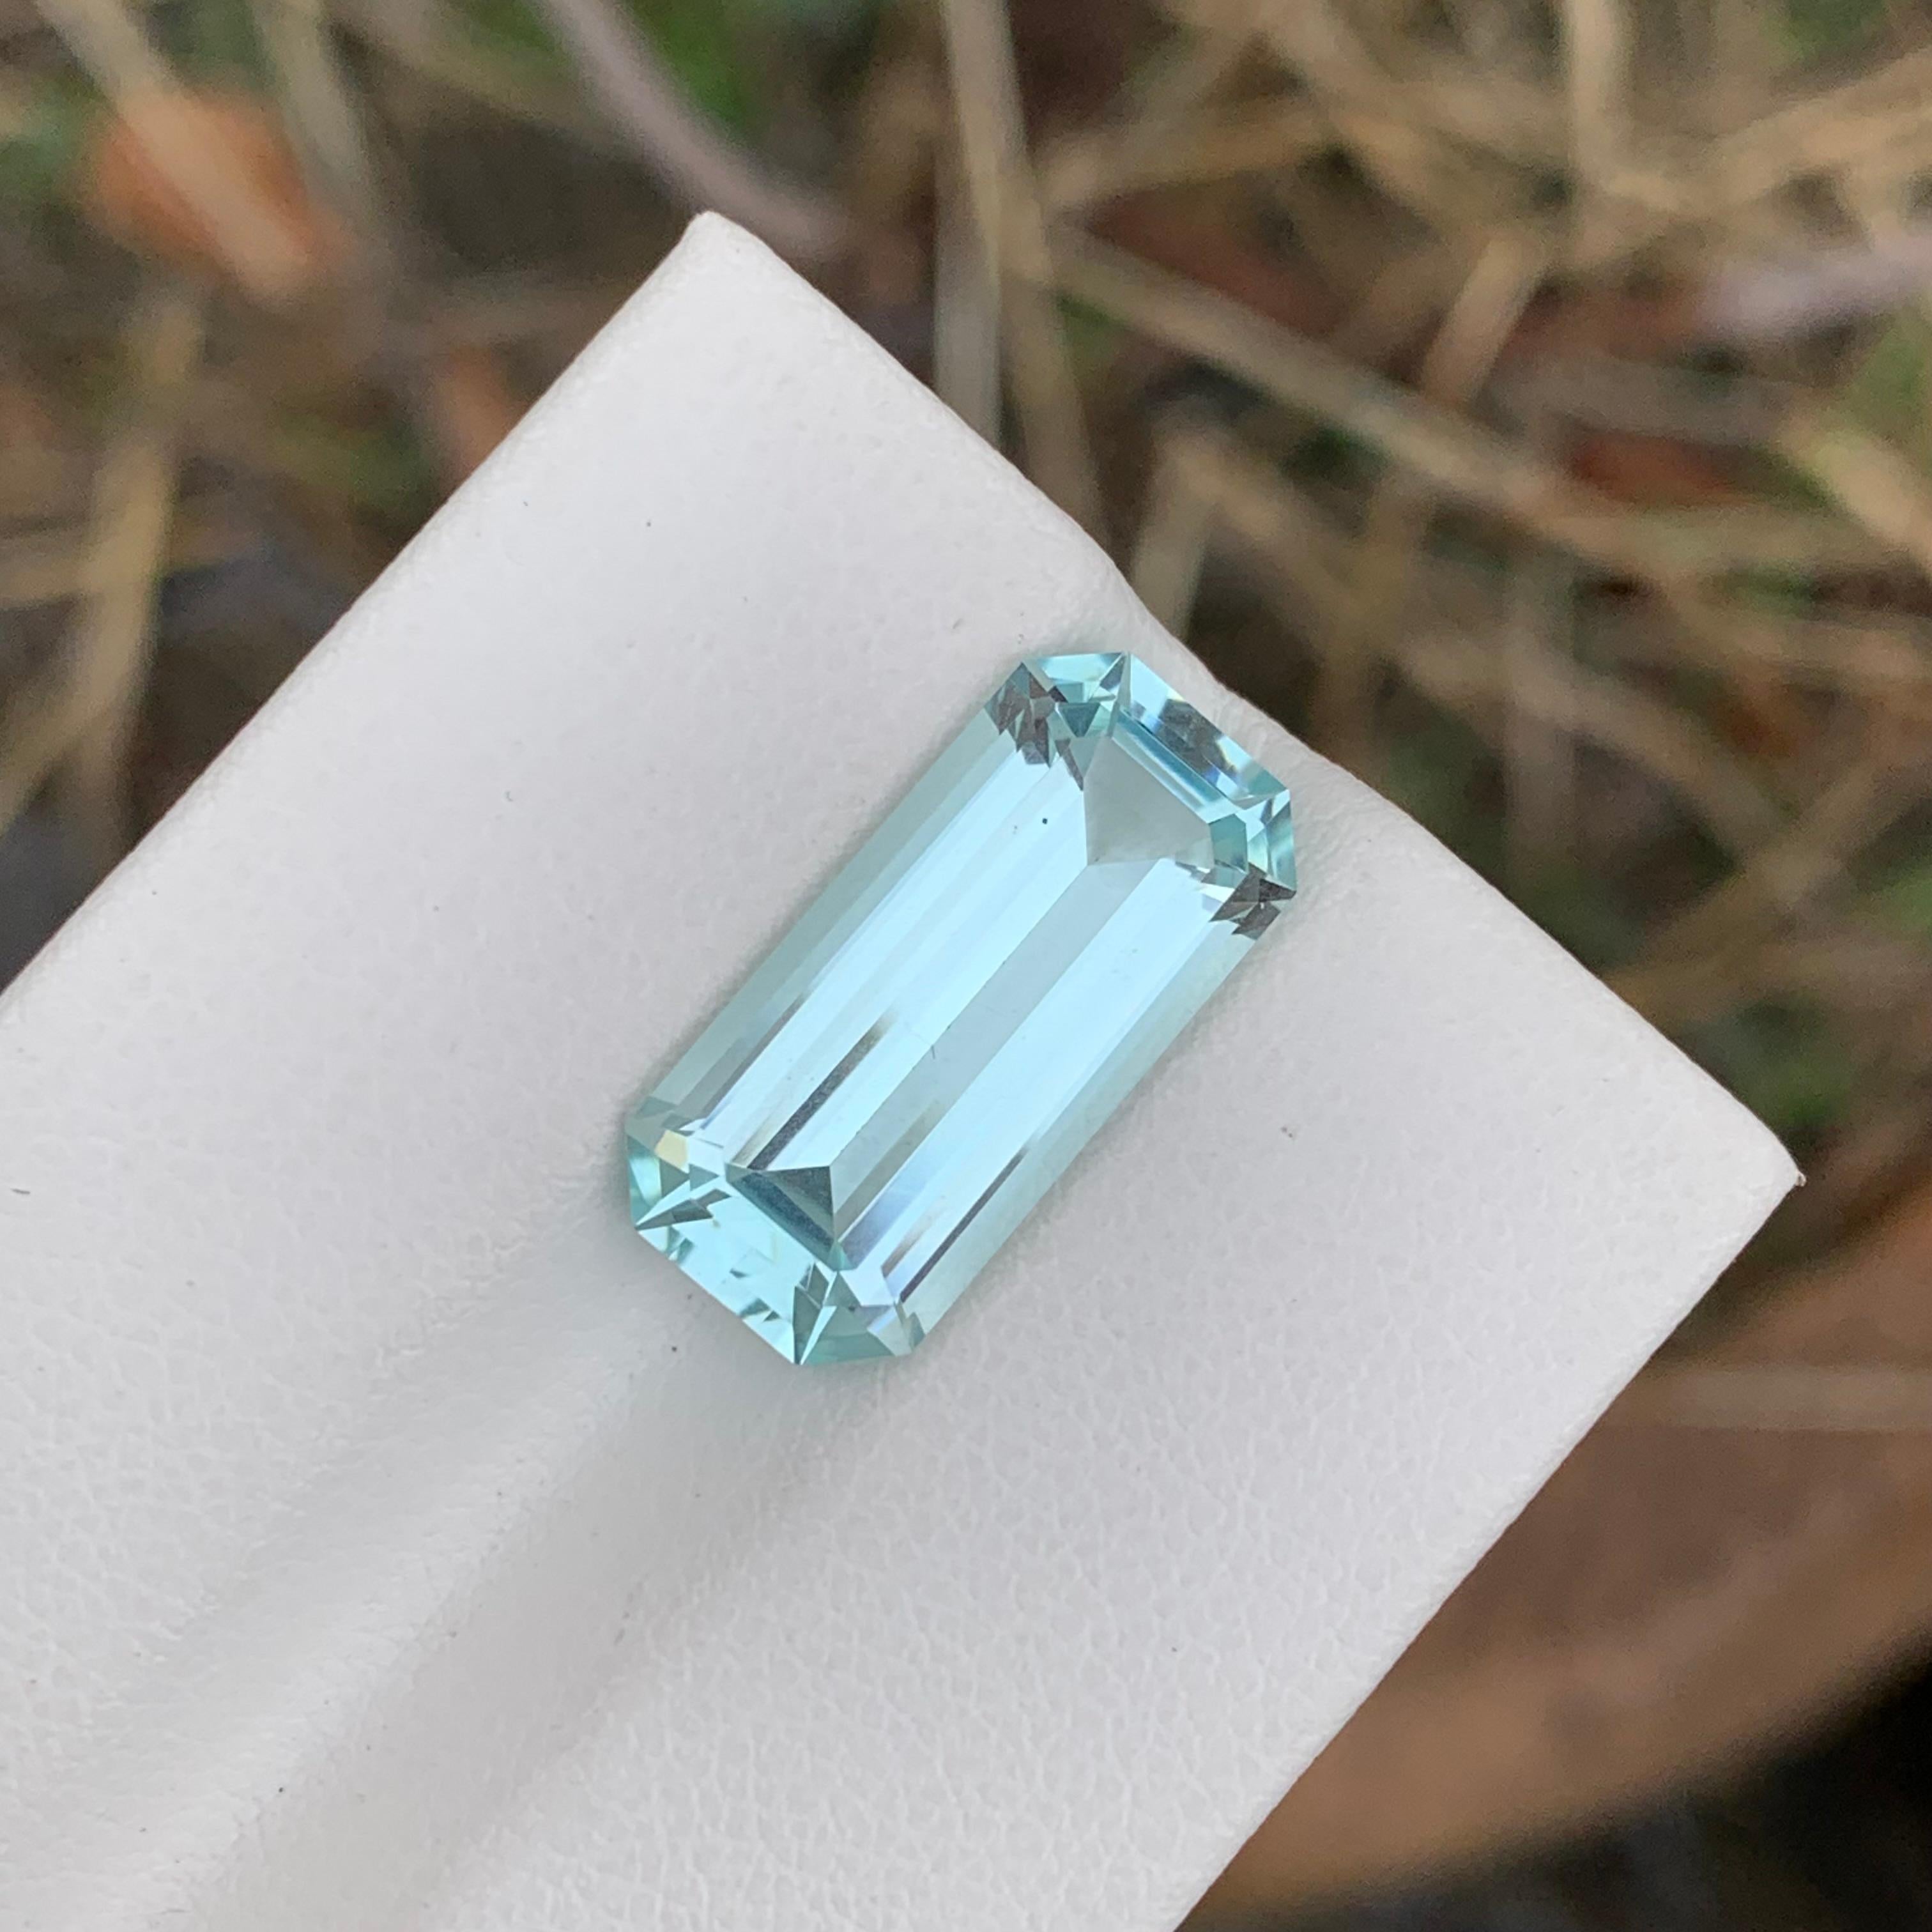 Loose Aquamarine
Weight: 6.30 Carat
Dimension: 17.4 x 8.3 x 5.8 Mm
Colour : Blue and white
Origin: Shigar Valley, Pakistan
Treatment: Non
Certificate : On Demand
Shape: Emerald

Aquamarine is a captivating gemstone known for its enchanting